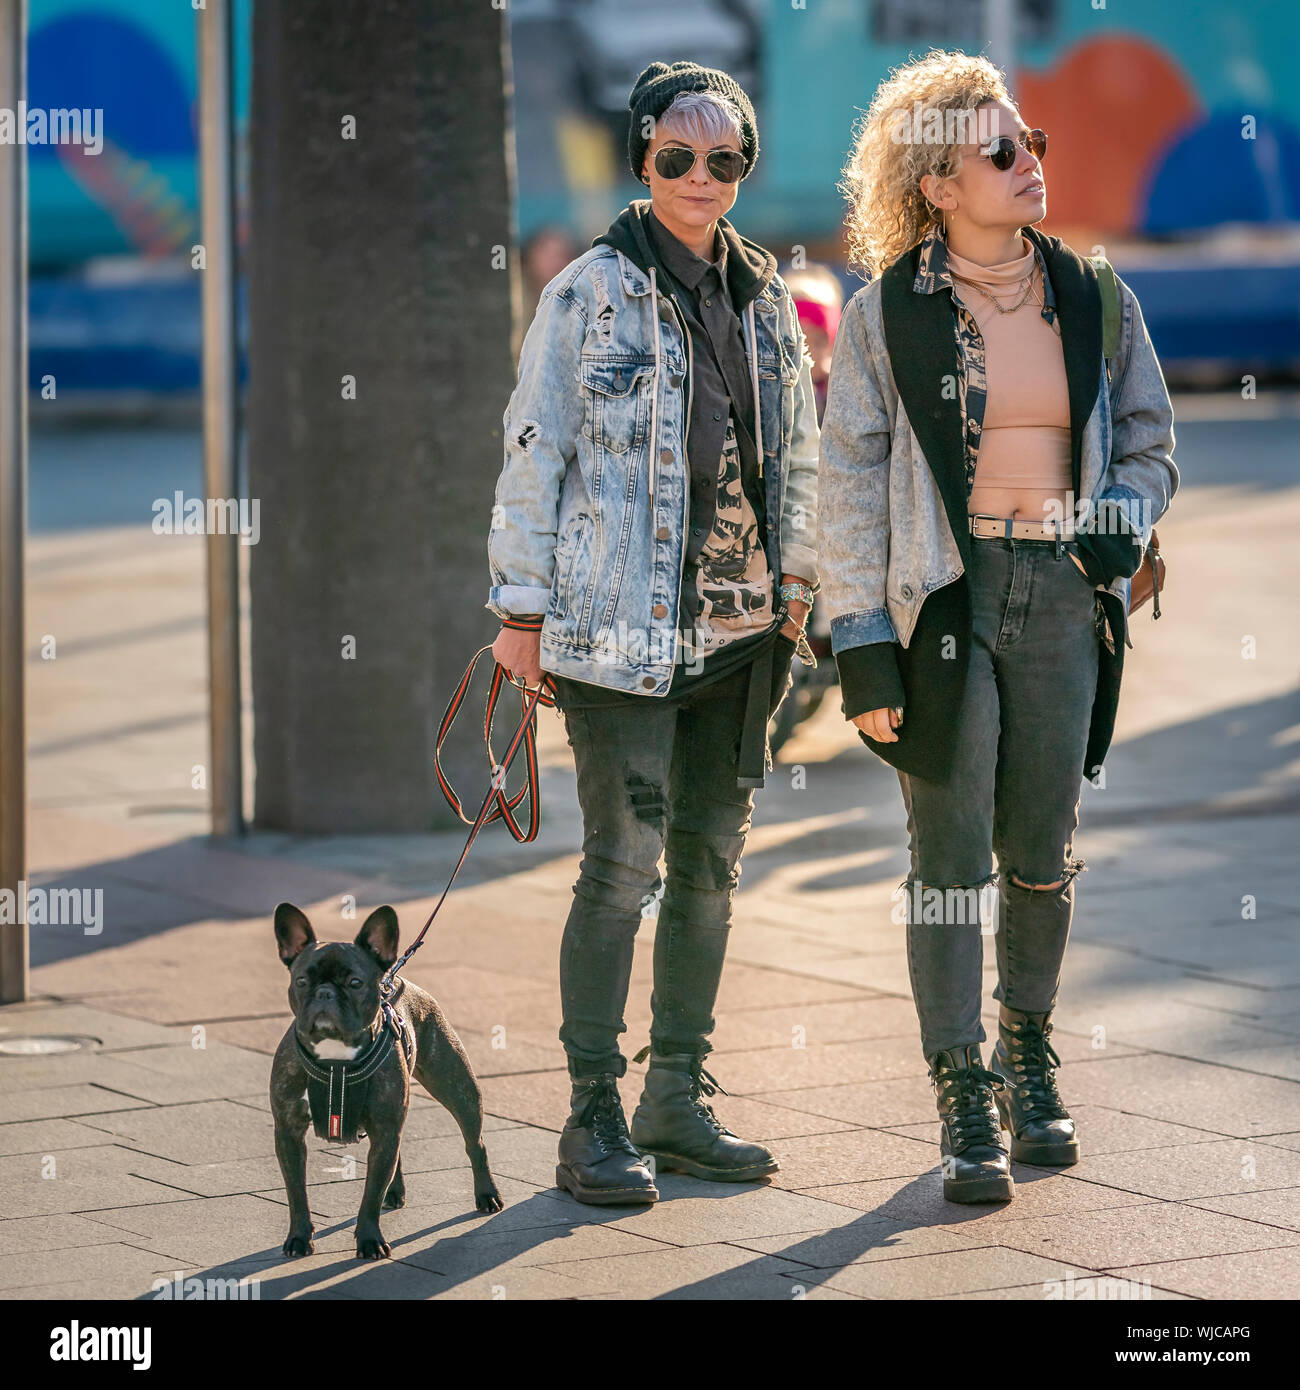 Women outdoors with a dog, Mennigarnott or Cultural day, Reykjavik, Iceland. Stock Photo